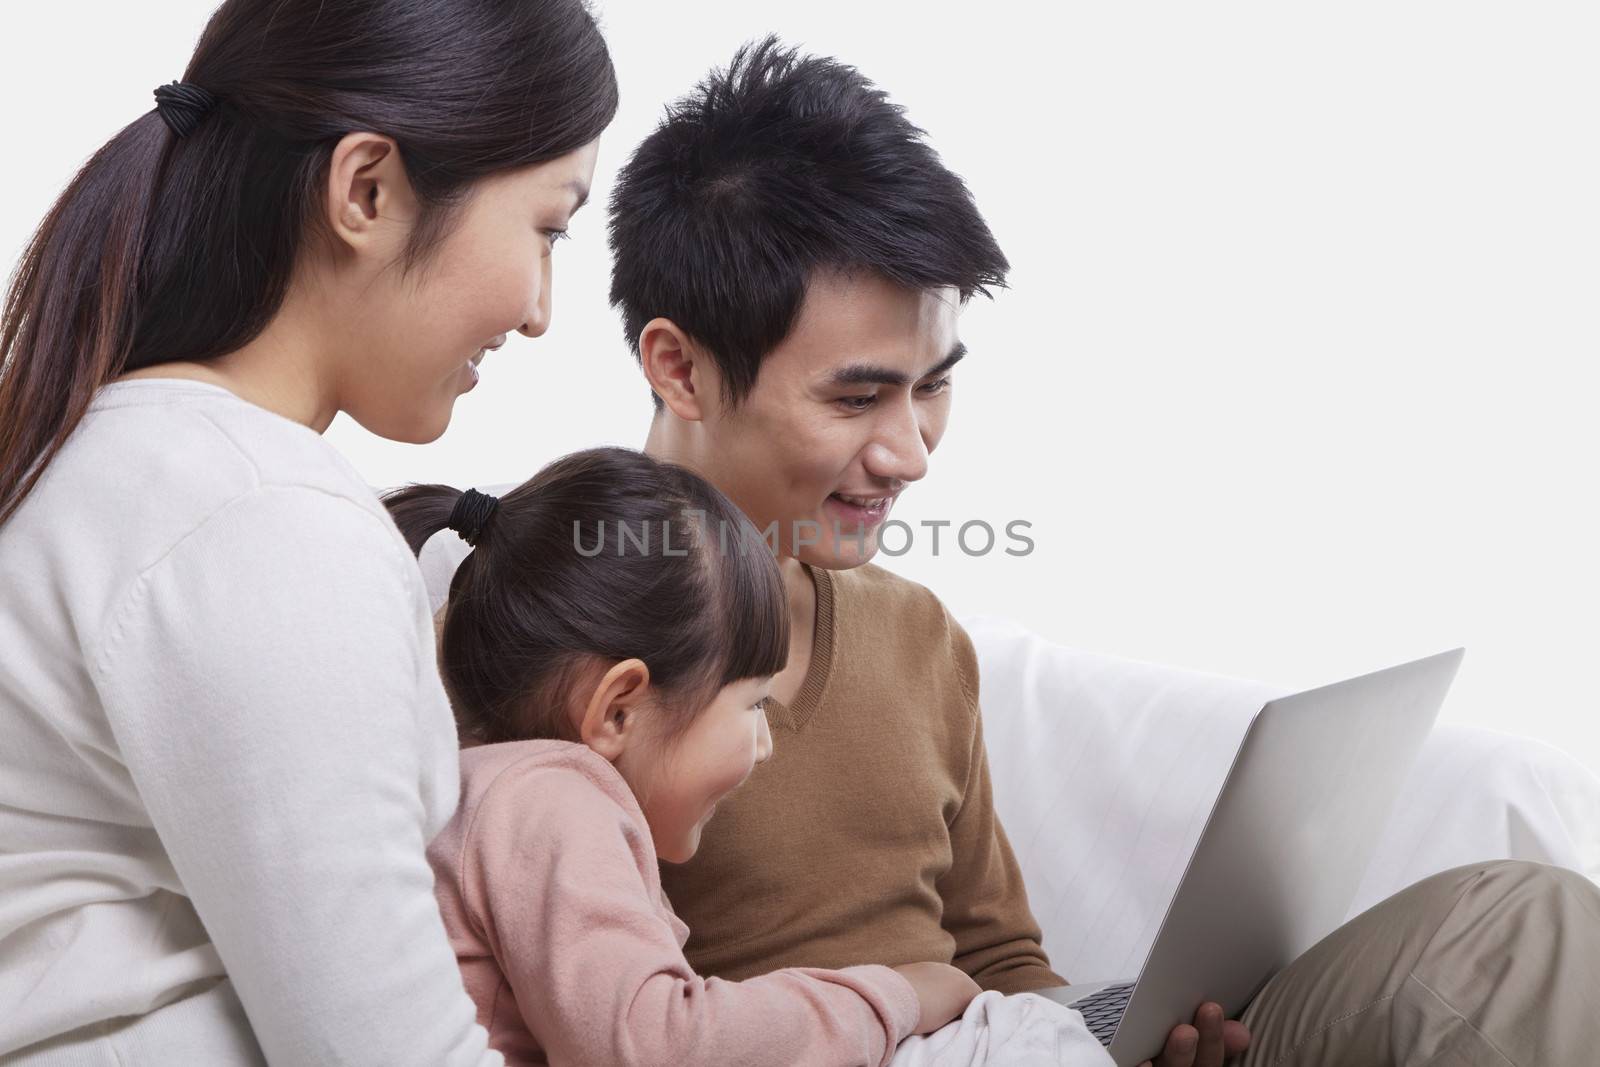 Family sitting on the sofa looking at laptop, studio shot by XiXinXing